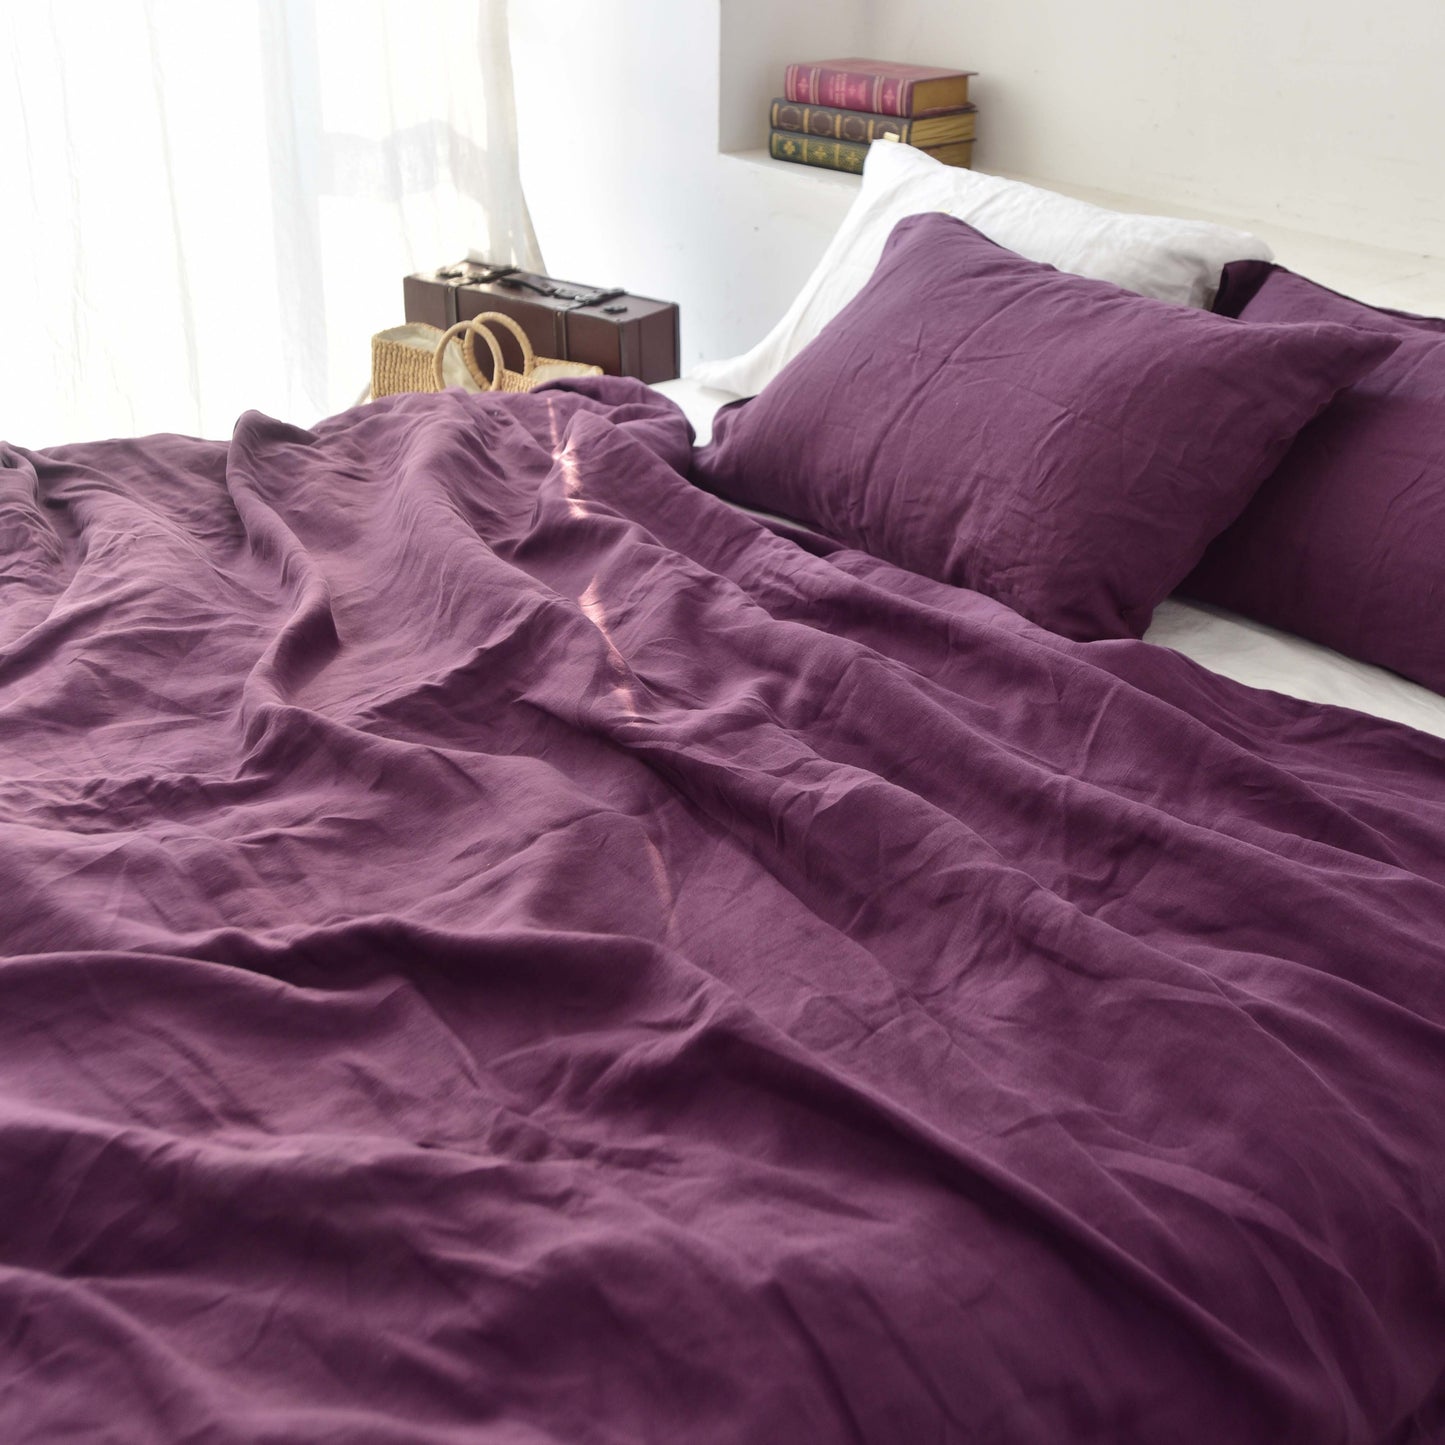 Violet French Linen Fitted Sheet - Plain Dyeing 16